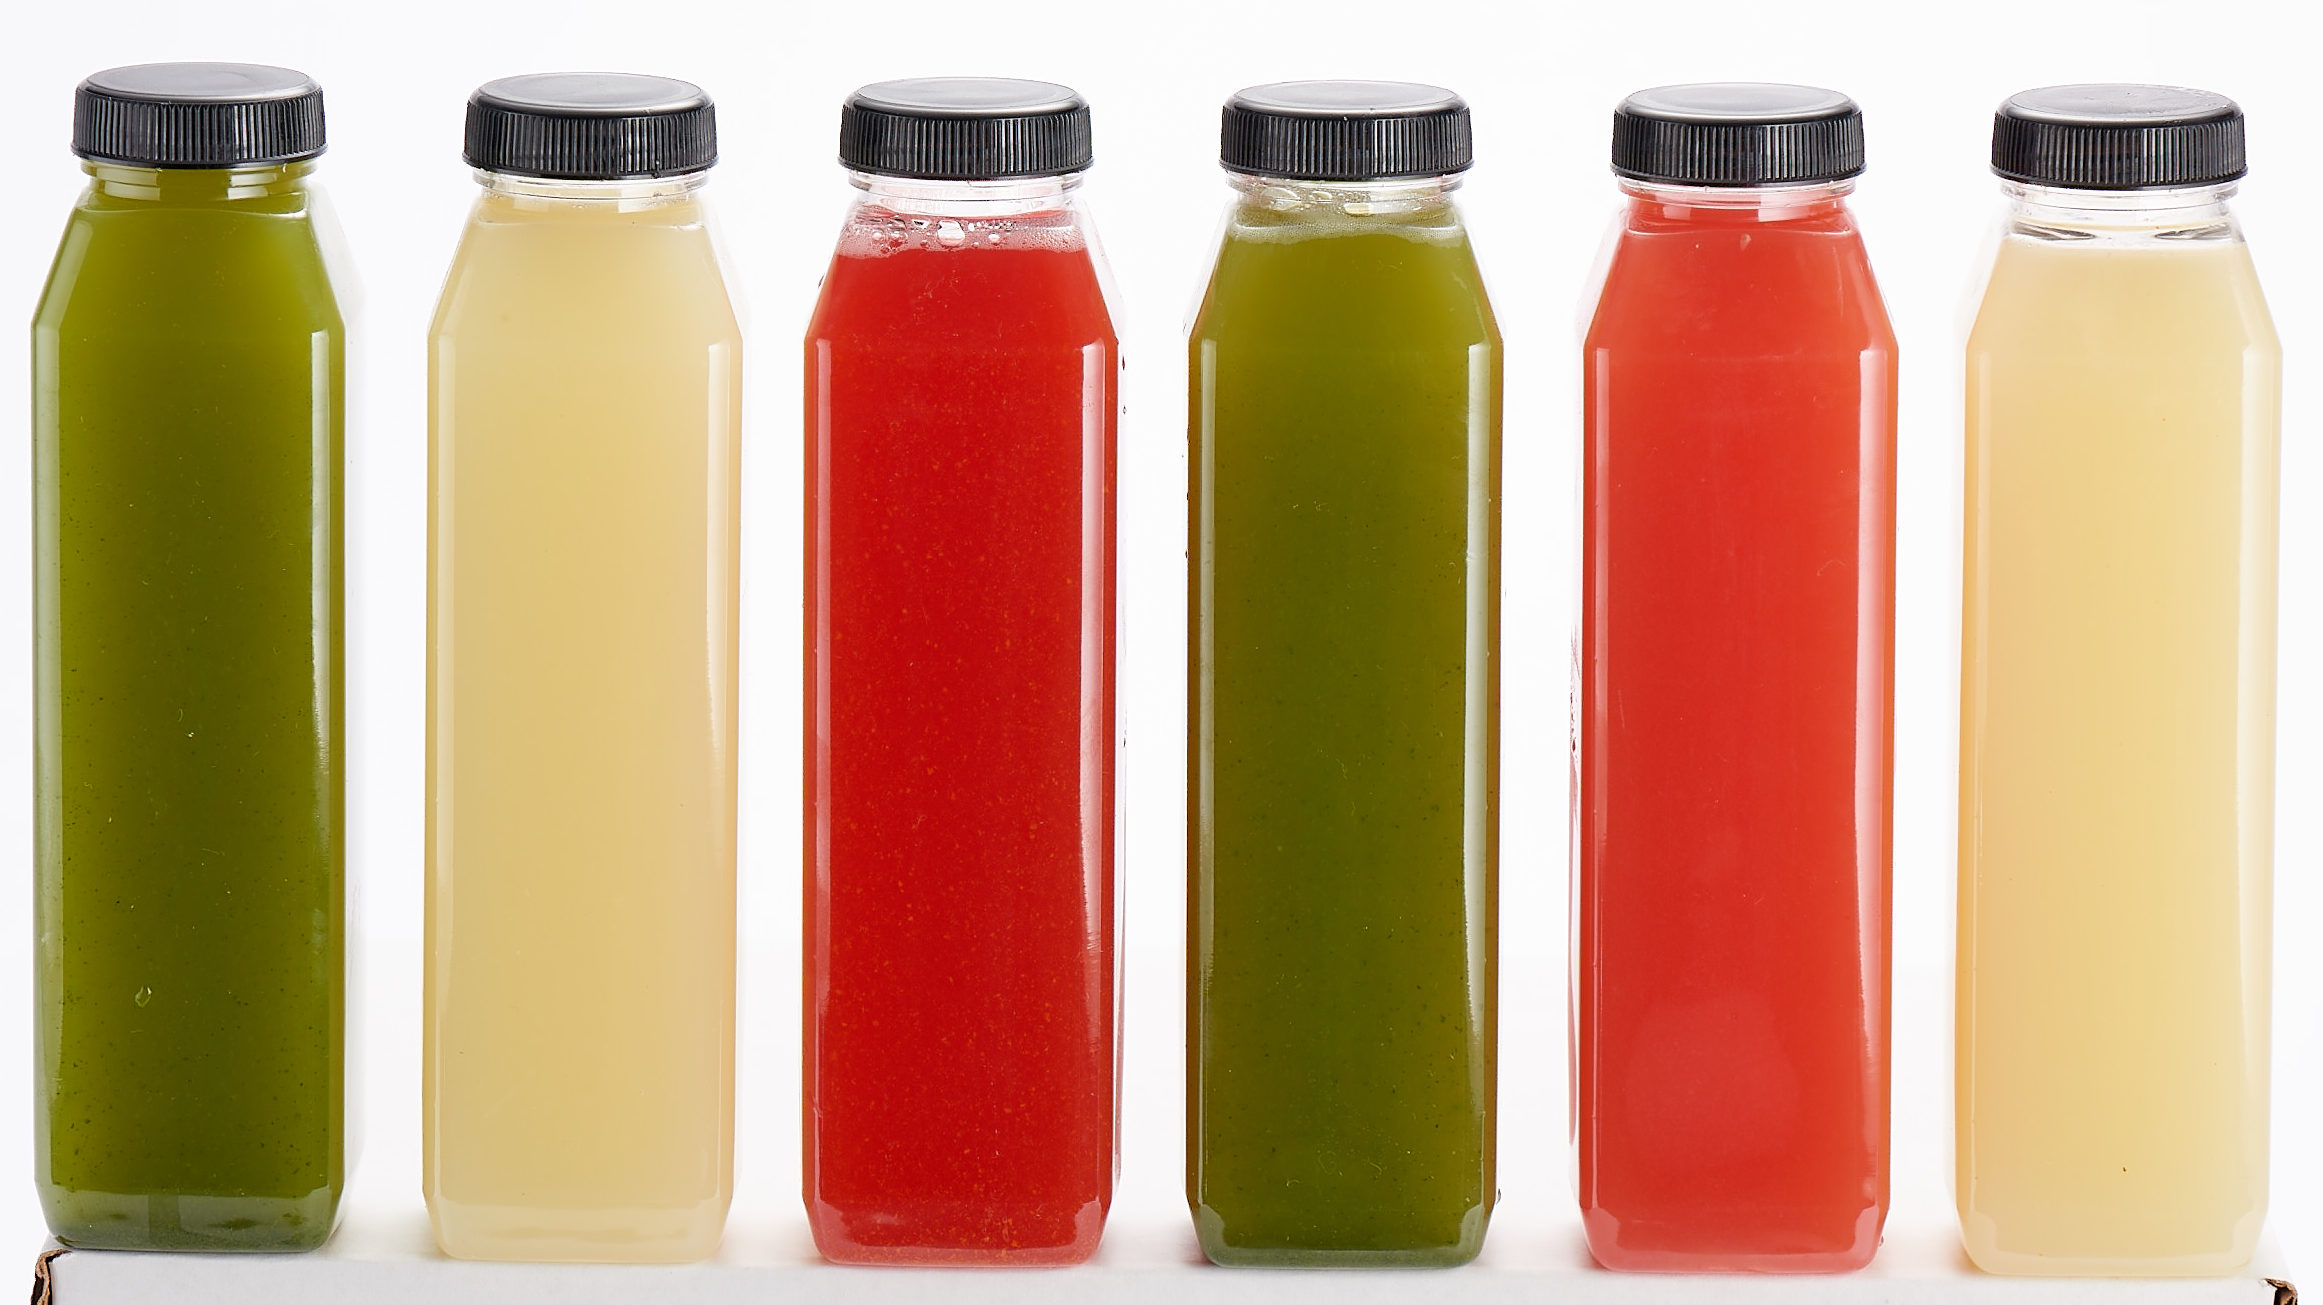 Cold-Pressed Juice, Product